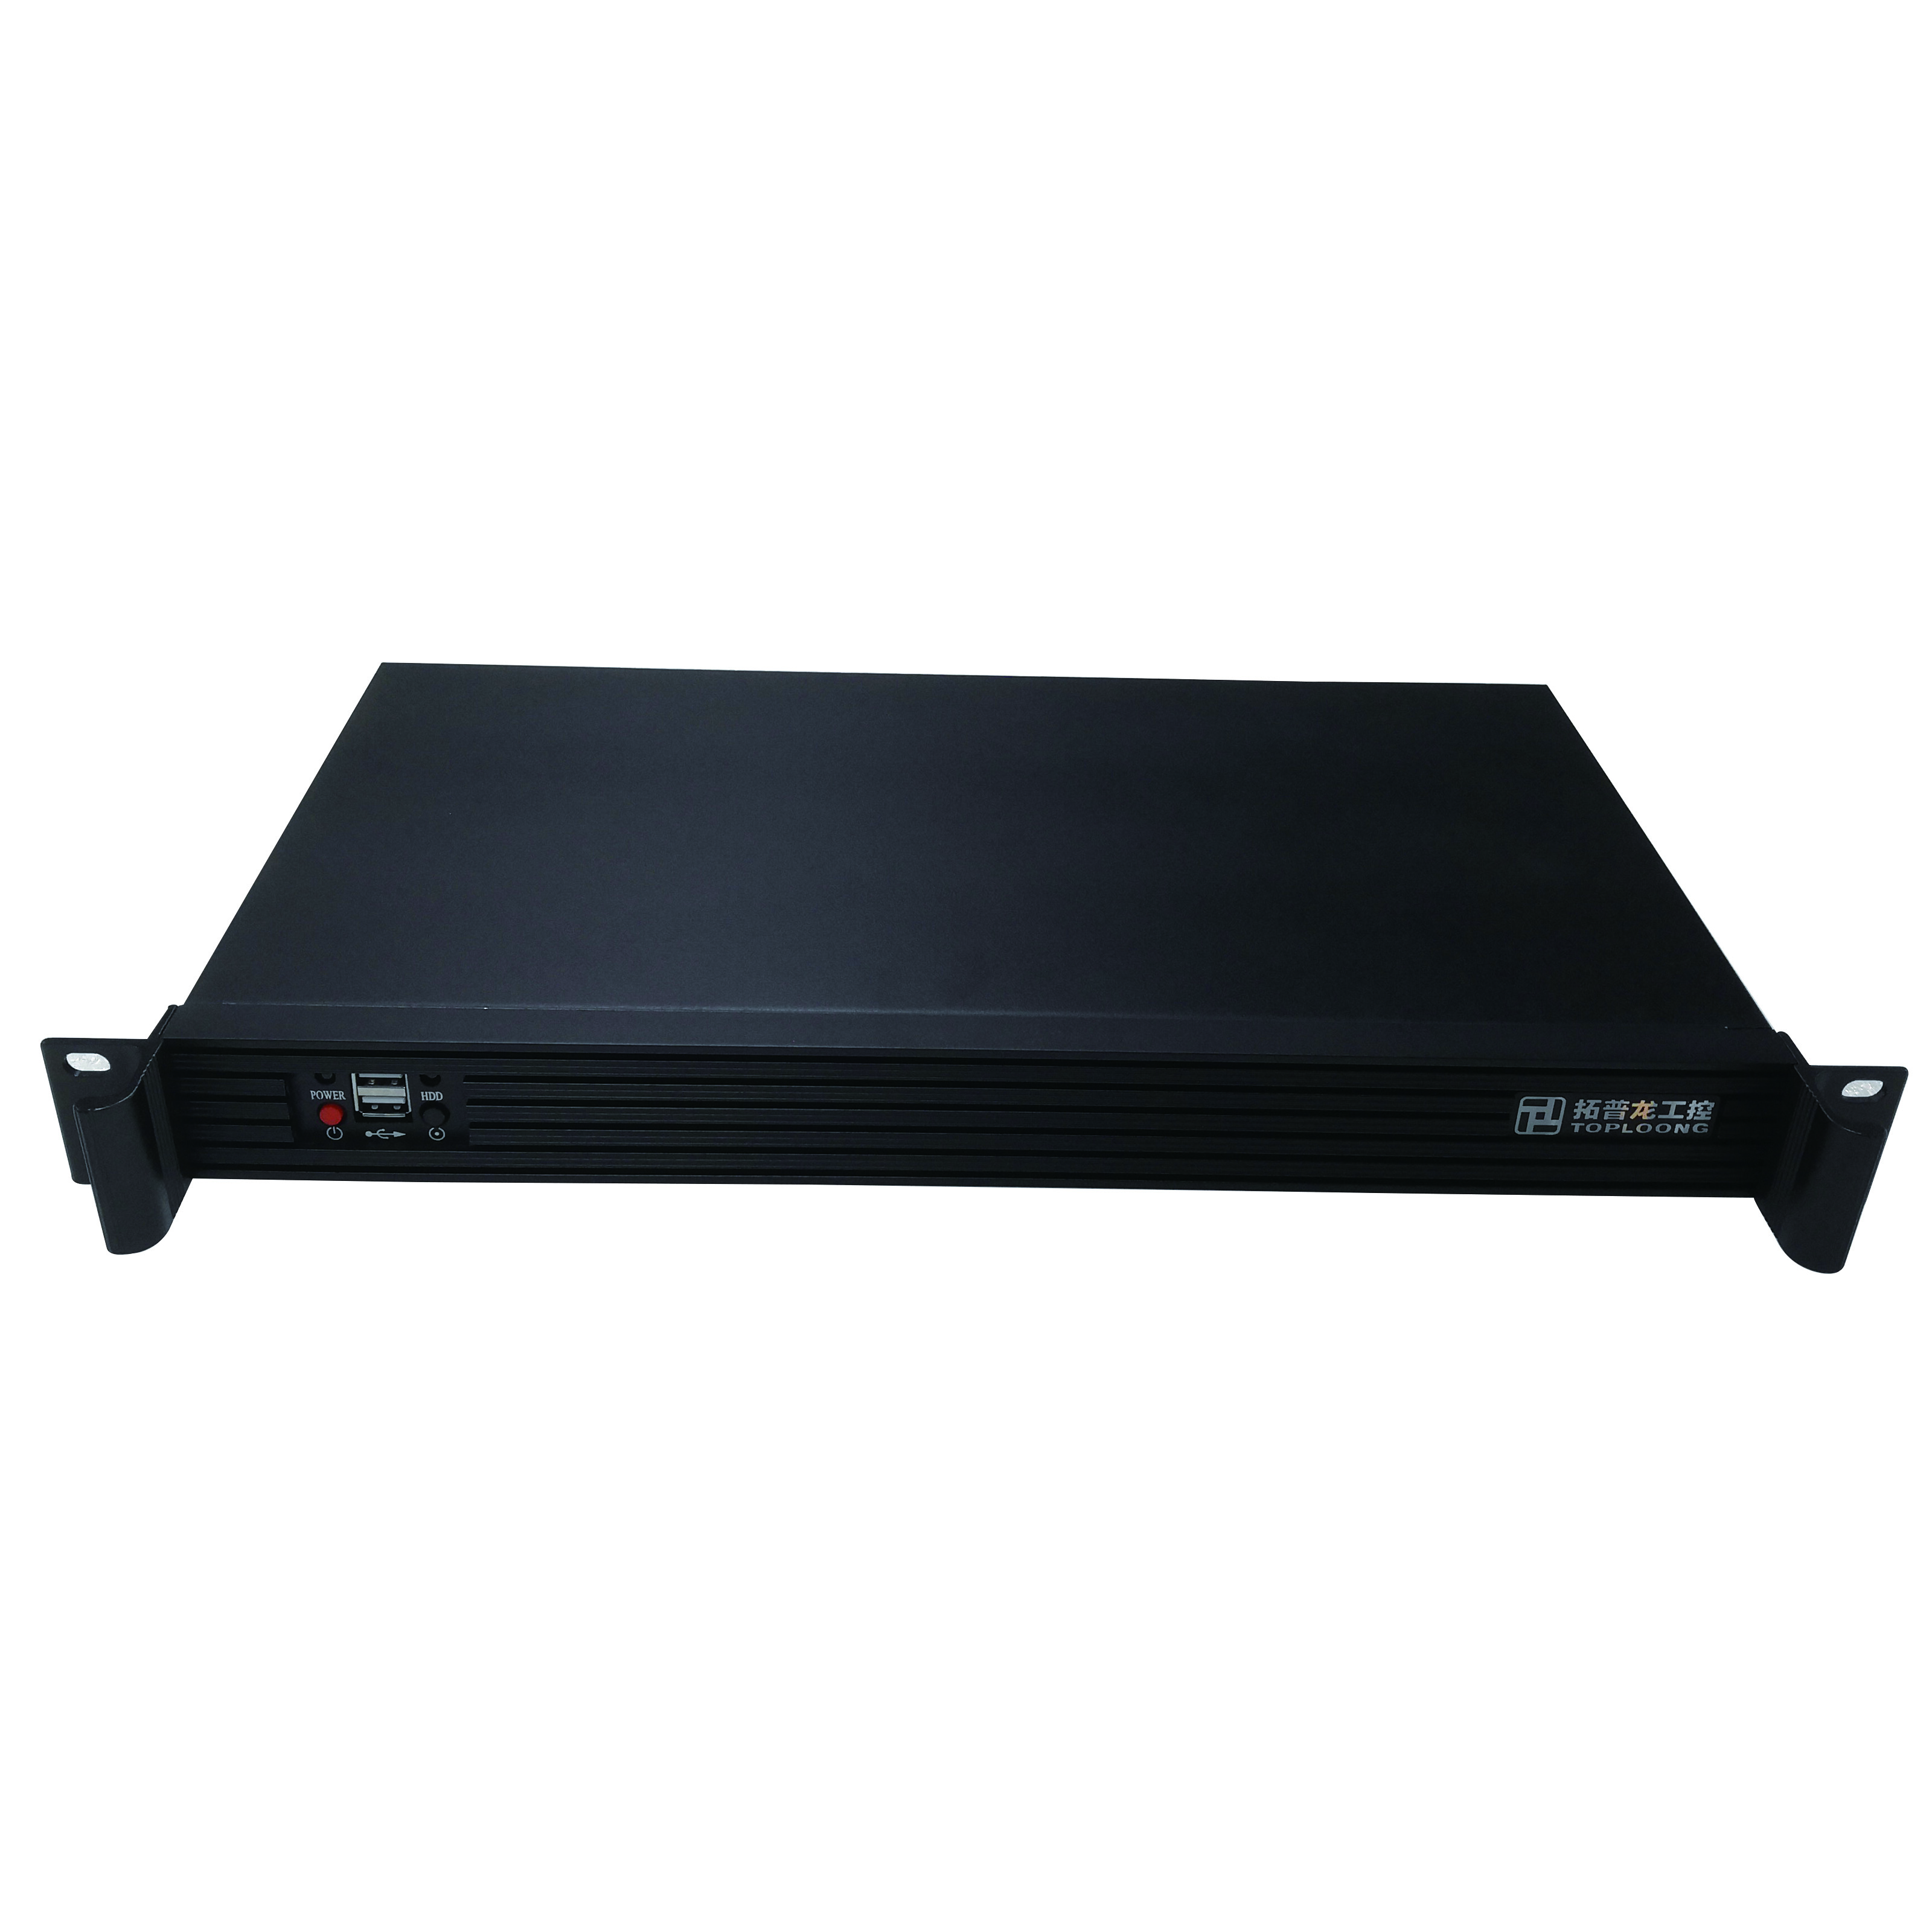 19 inch 1U250L rack-mounted server chassis 1U short computer case aluminium panel support MINI-ITX motherboard 200W power supply